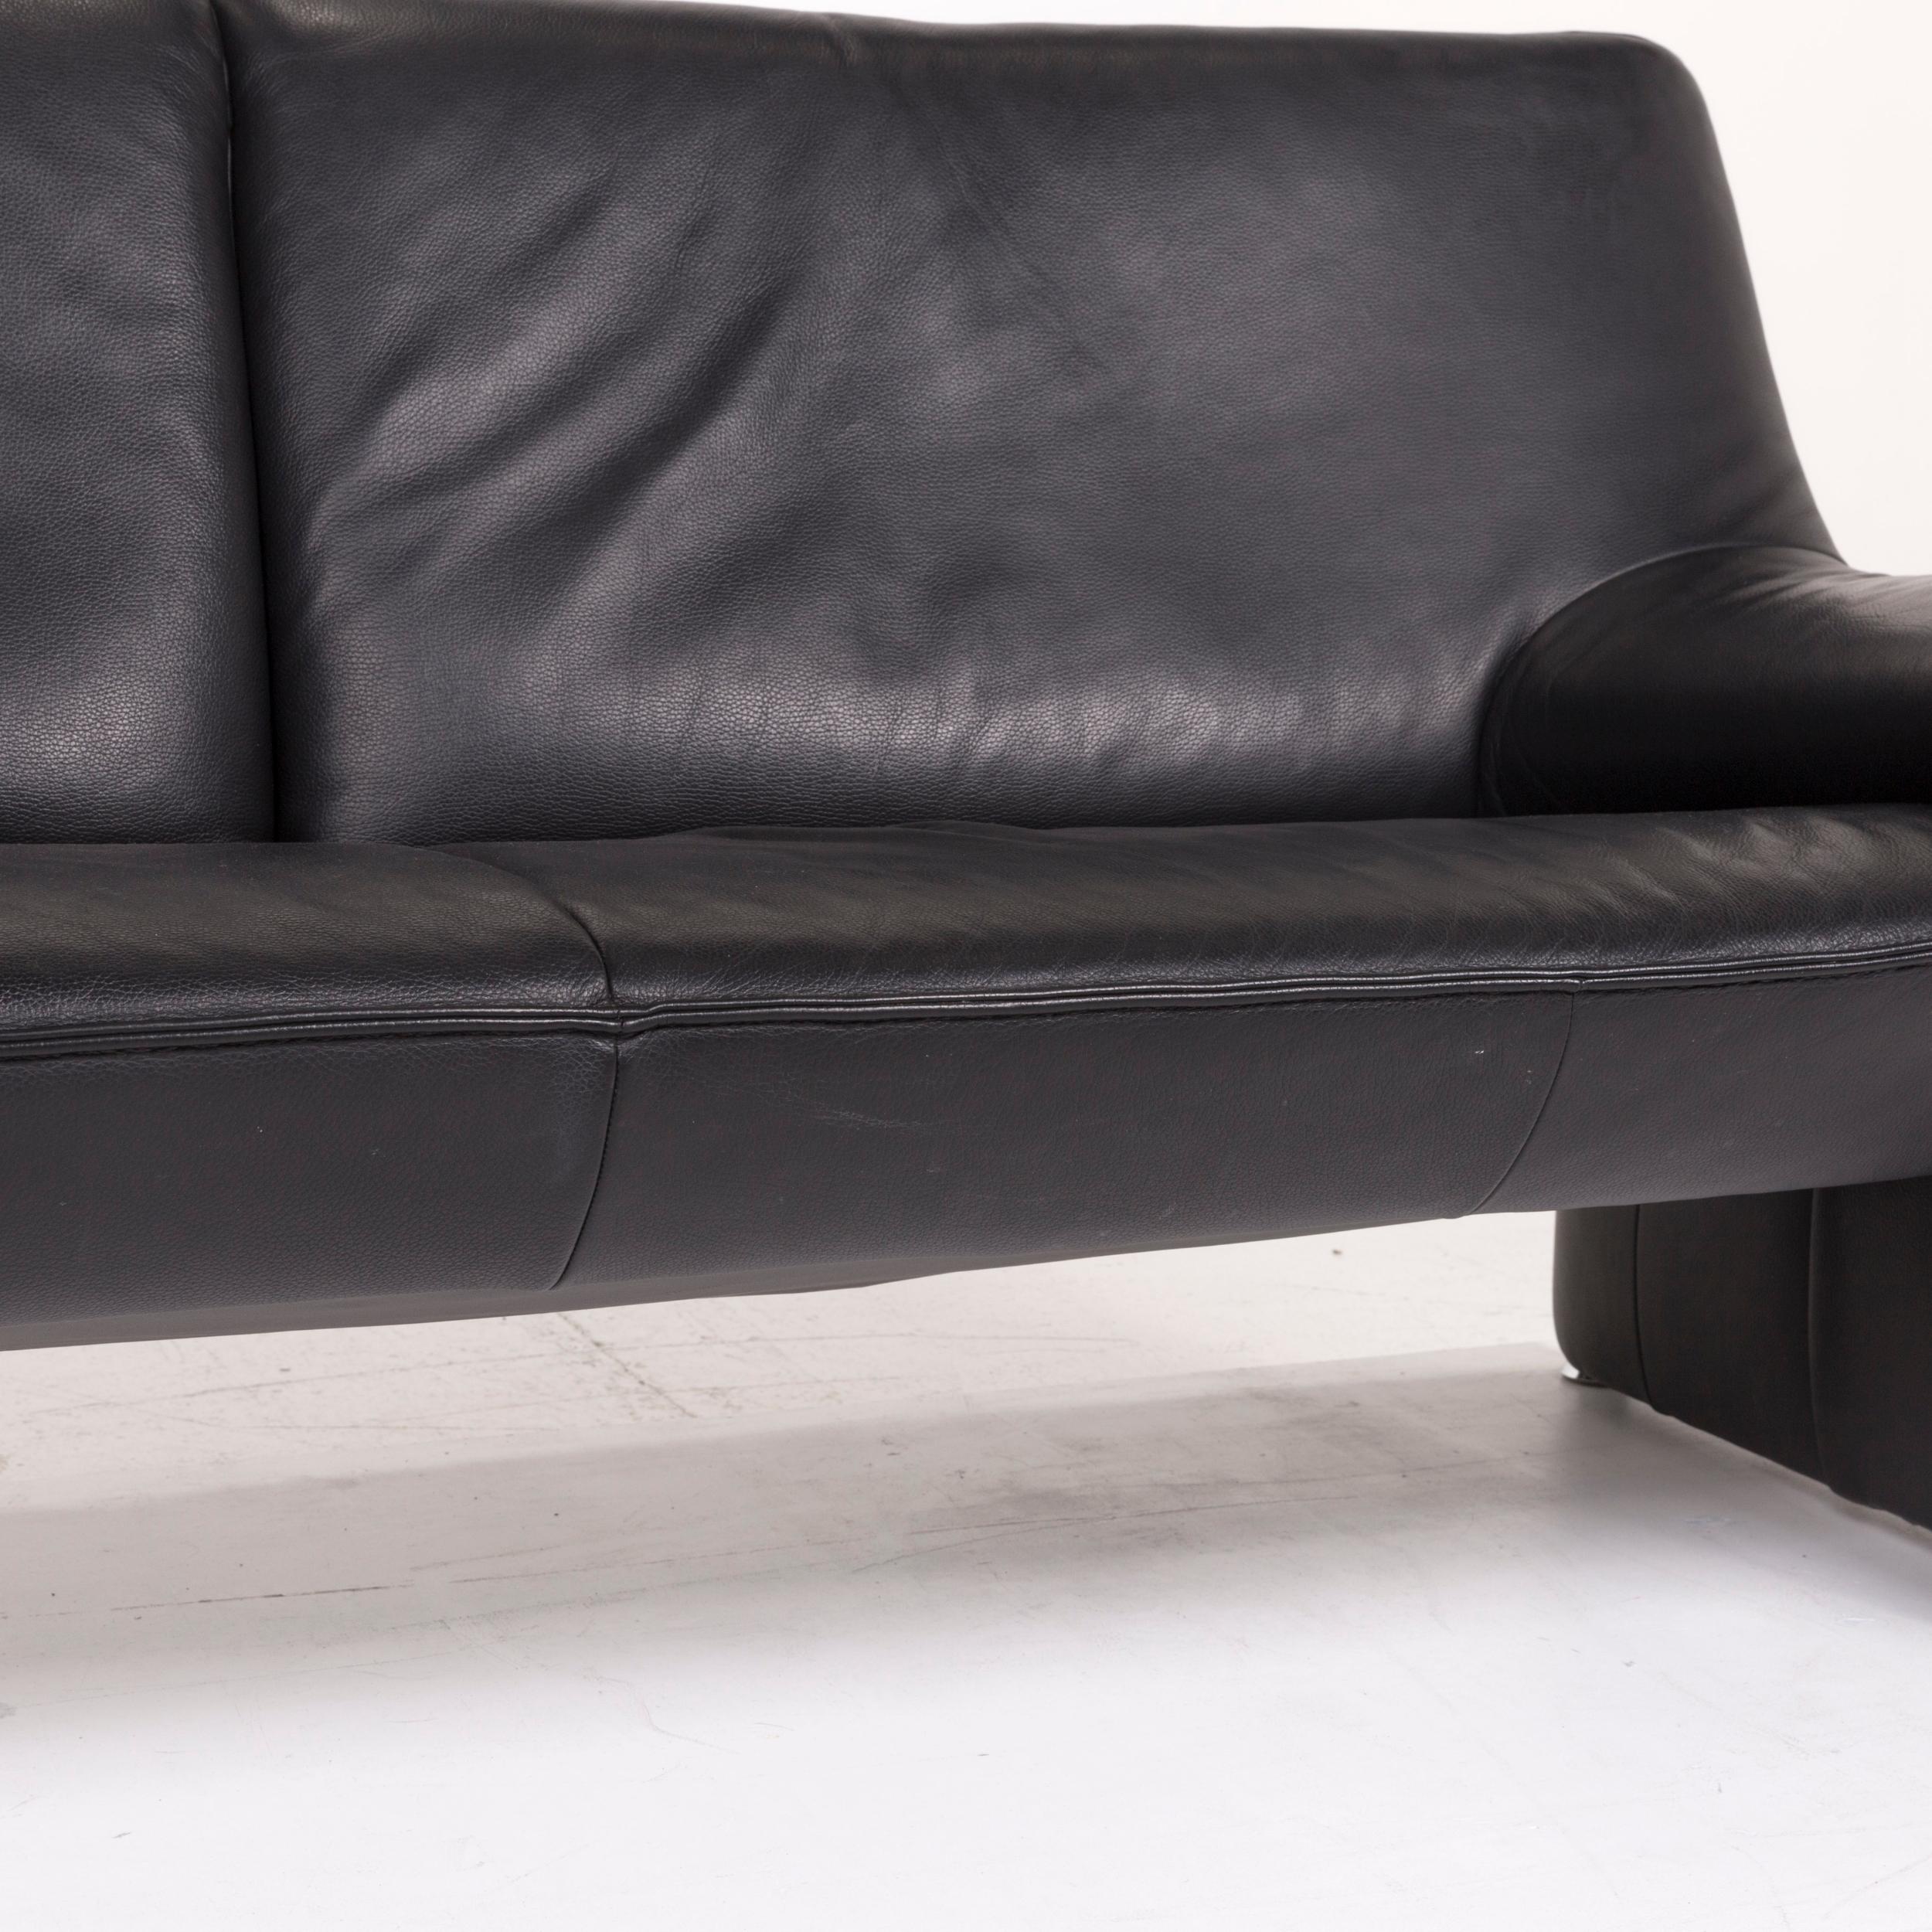 We bring to you a Laauser Atlanta leather sofa black three-seat couch.
   
 

 Product measurements in centimeters:
 

Depth 83
Width 197
Height 85
Seat-height 45
Rest-height 53
Seat-depth 53
Seat-width 135
Back-height 45.